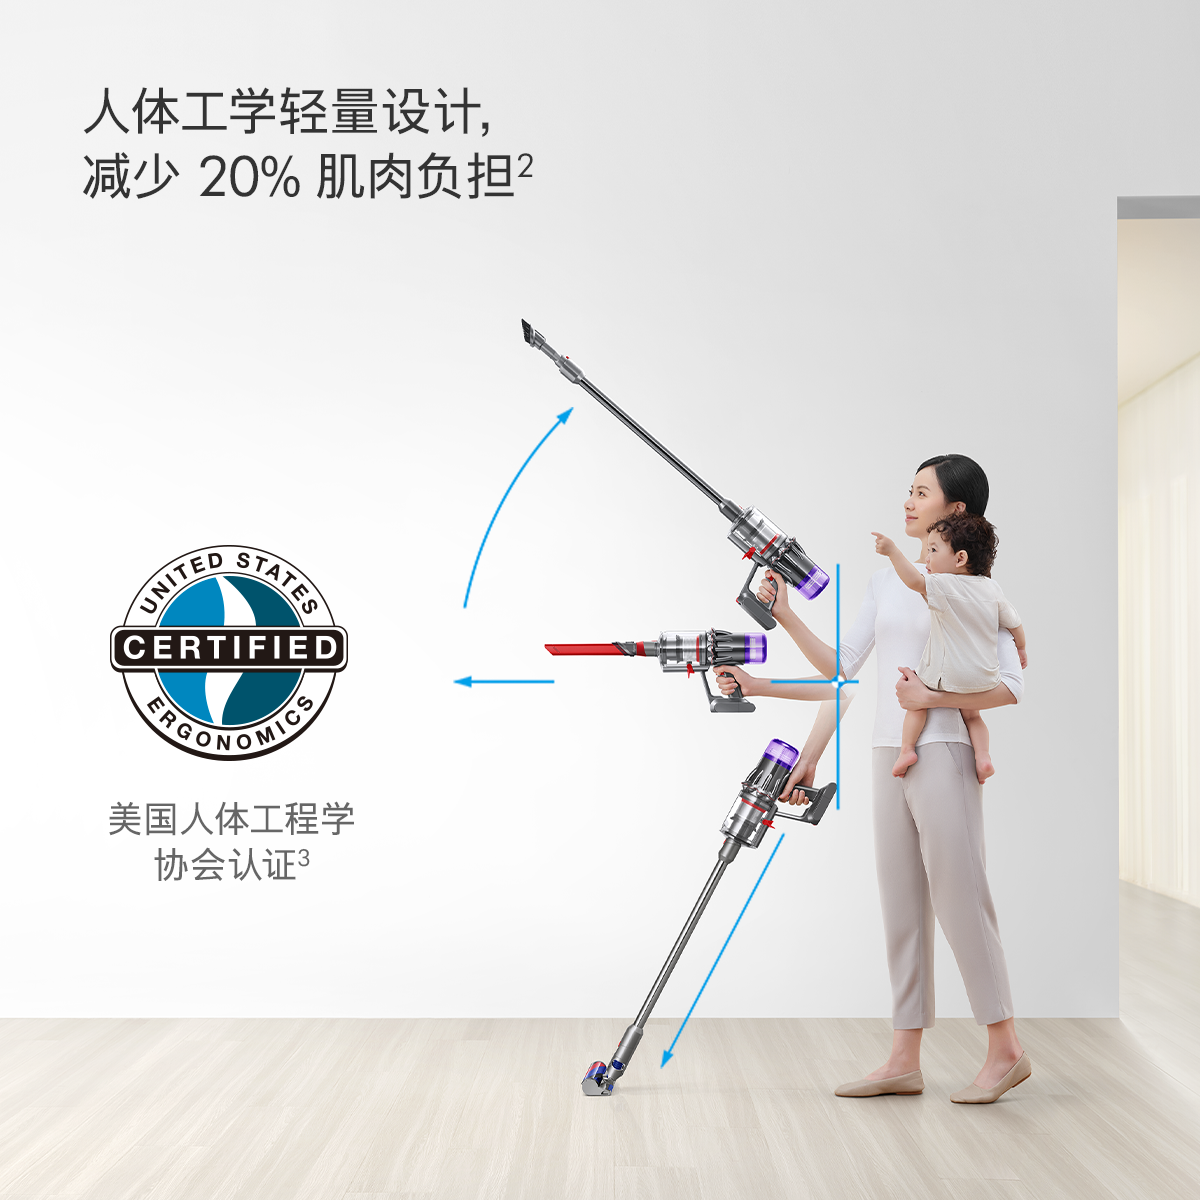 A person holding a bow and arrow Description automatically generated with medium confidence